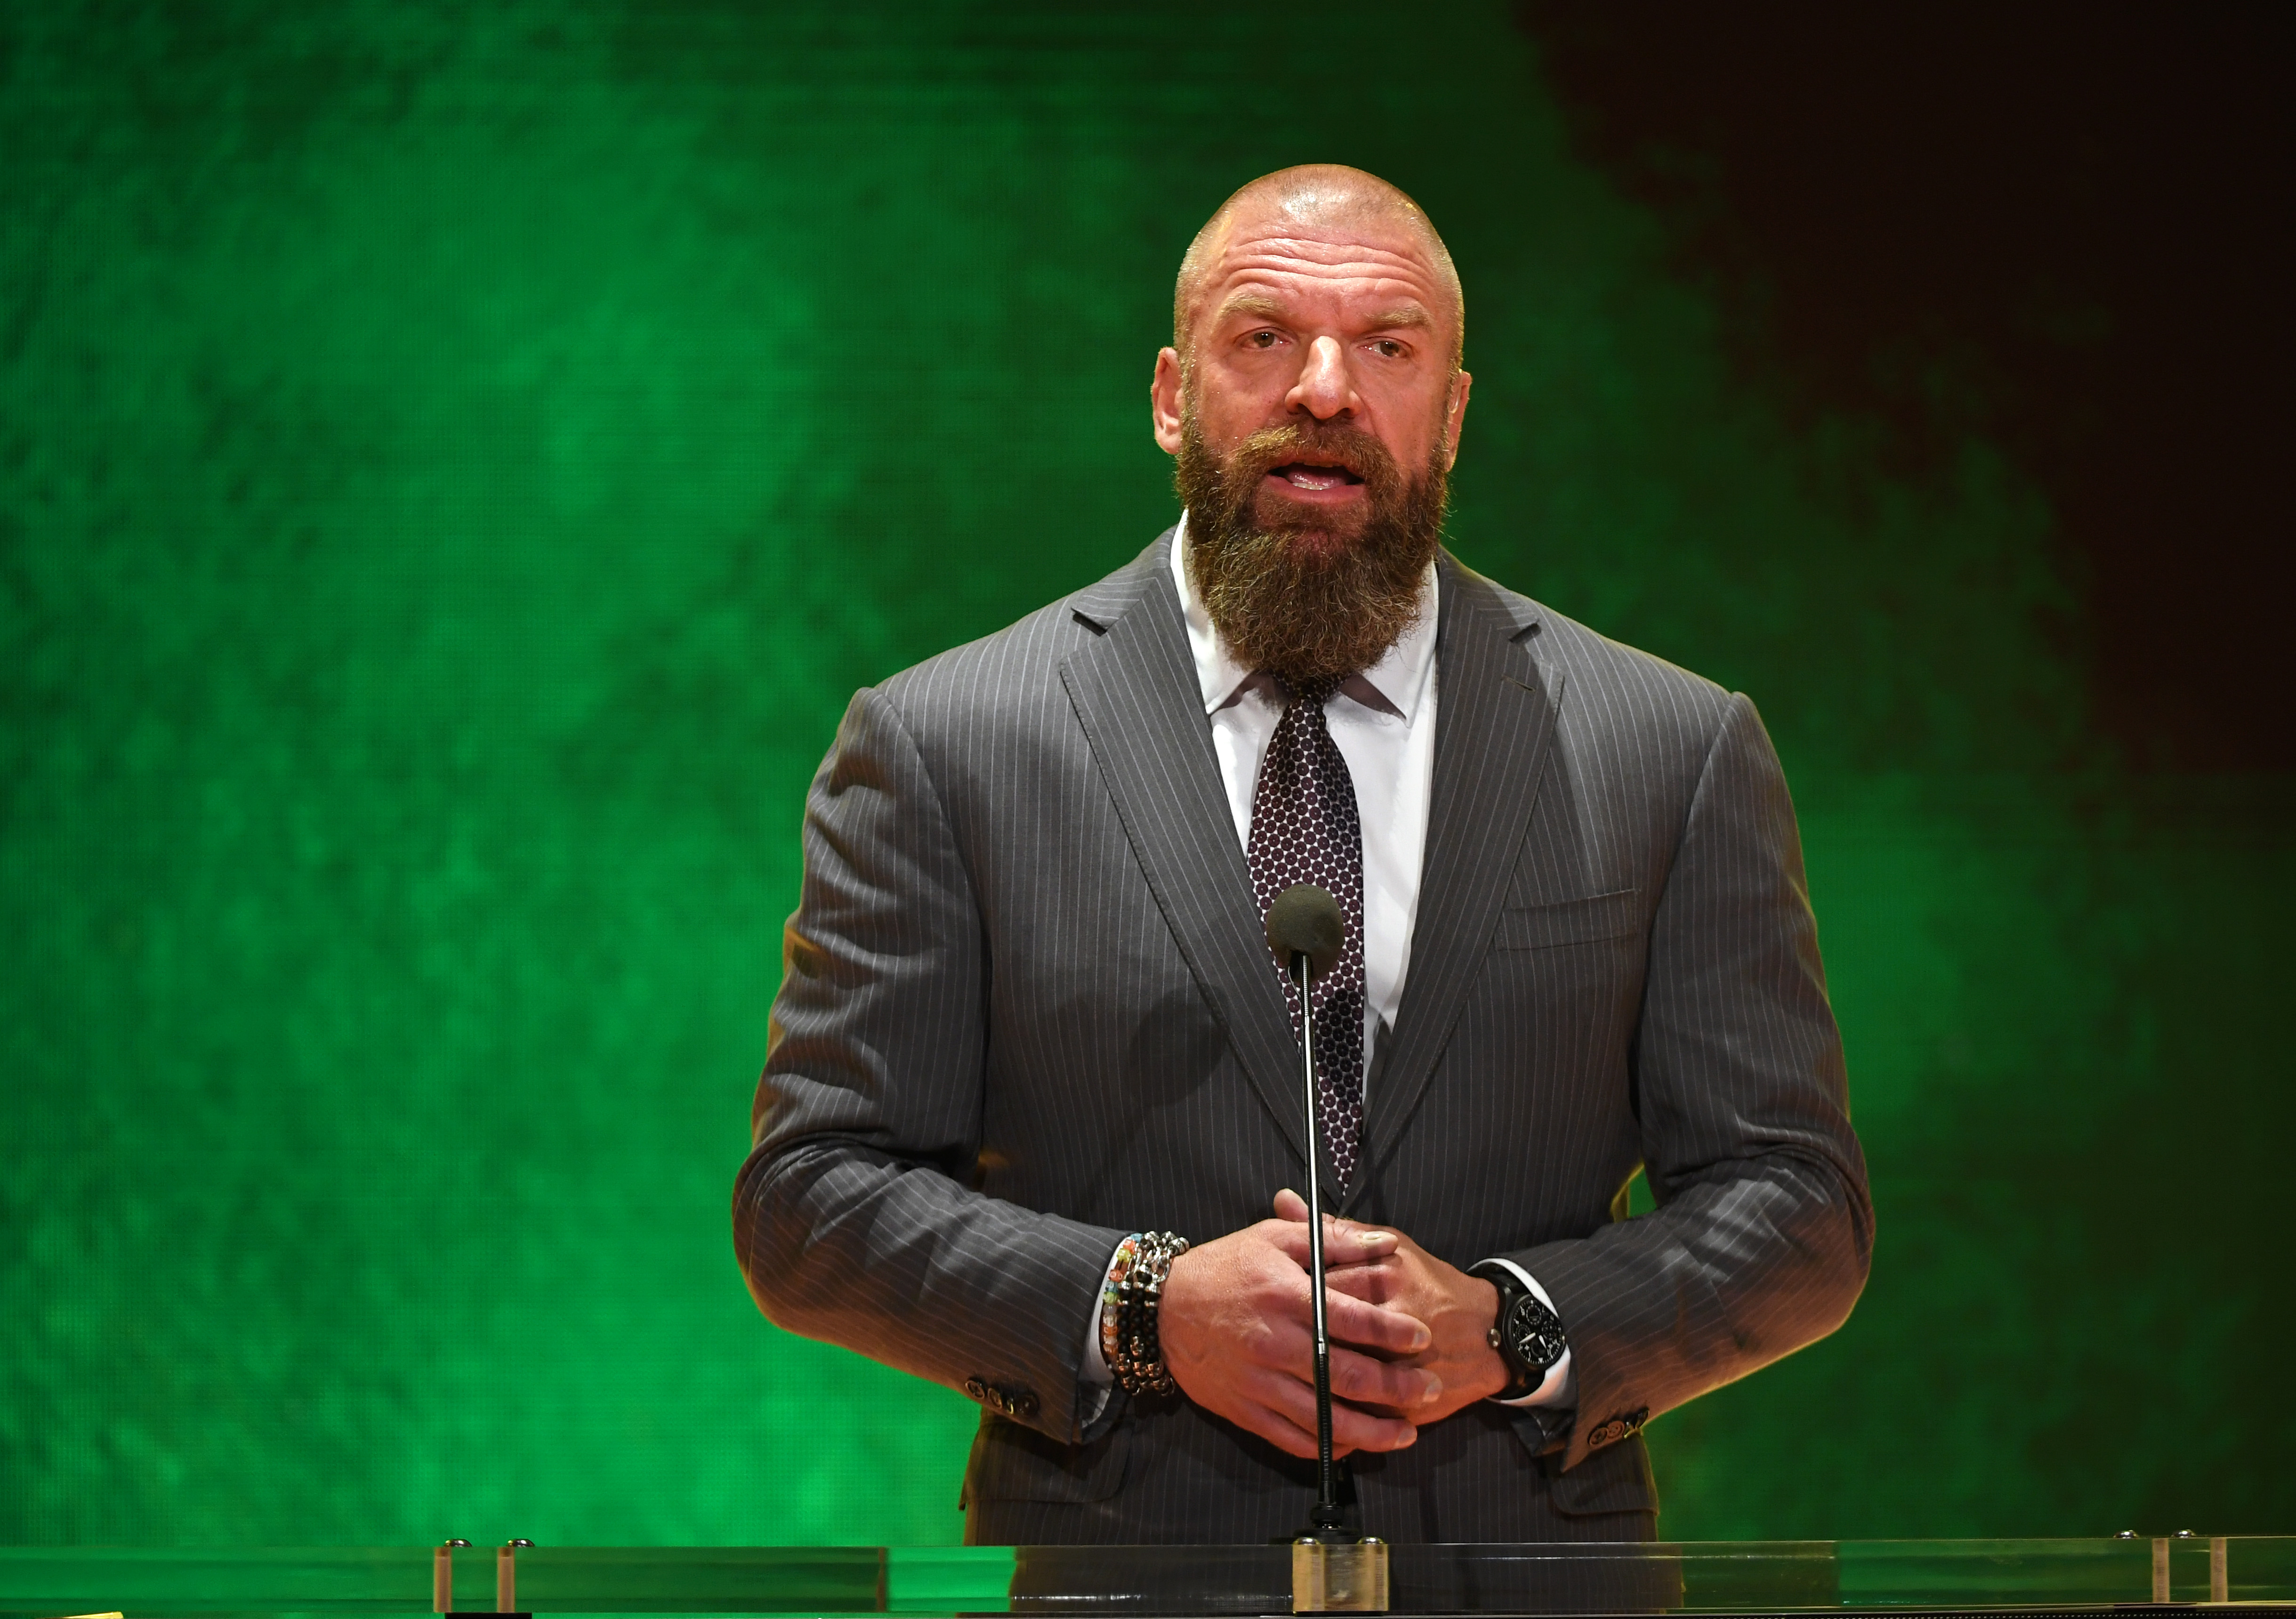 Triple H Says He's Done Wrestling in WWE After Suffering from Heart Failure